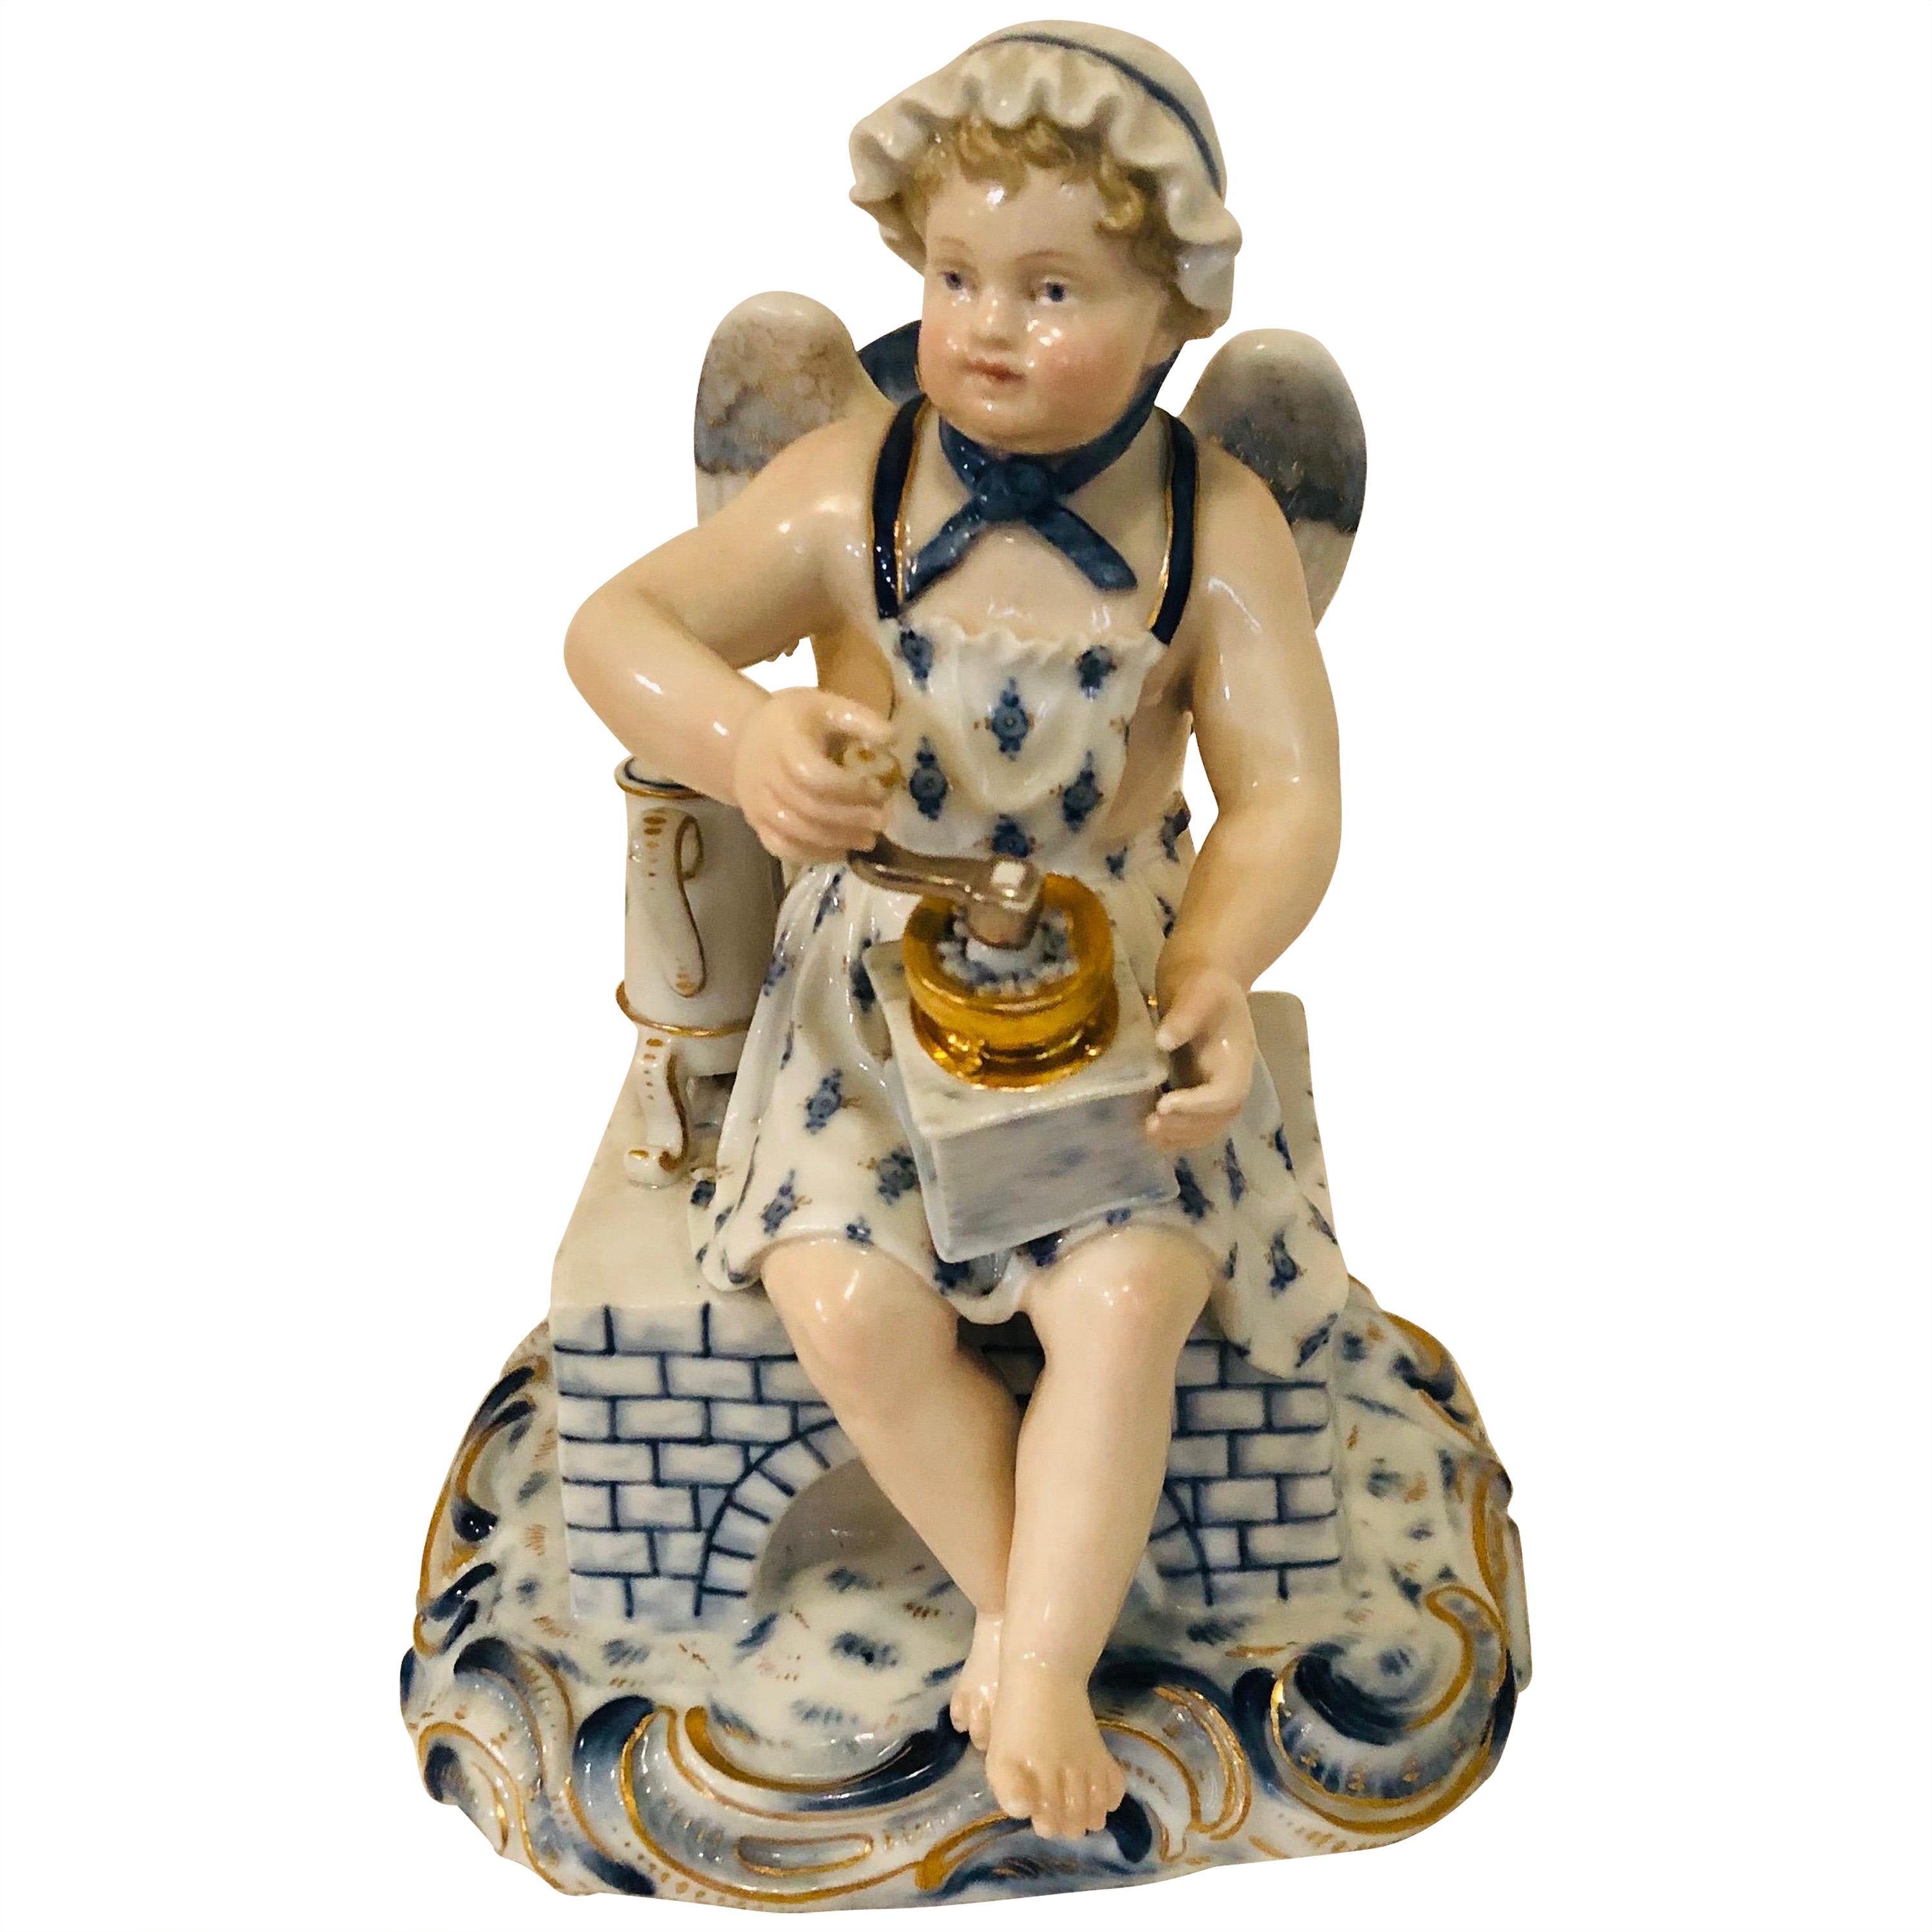 Meissen Figurine of a Boy Angel with Wings Grounding Coffee for His Coffee Pot